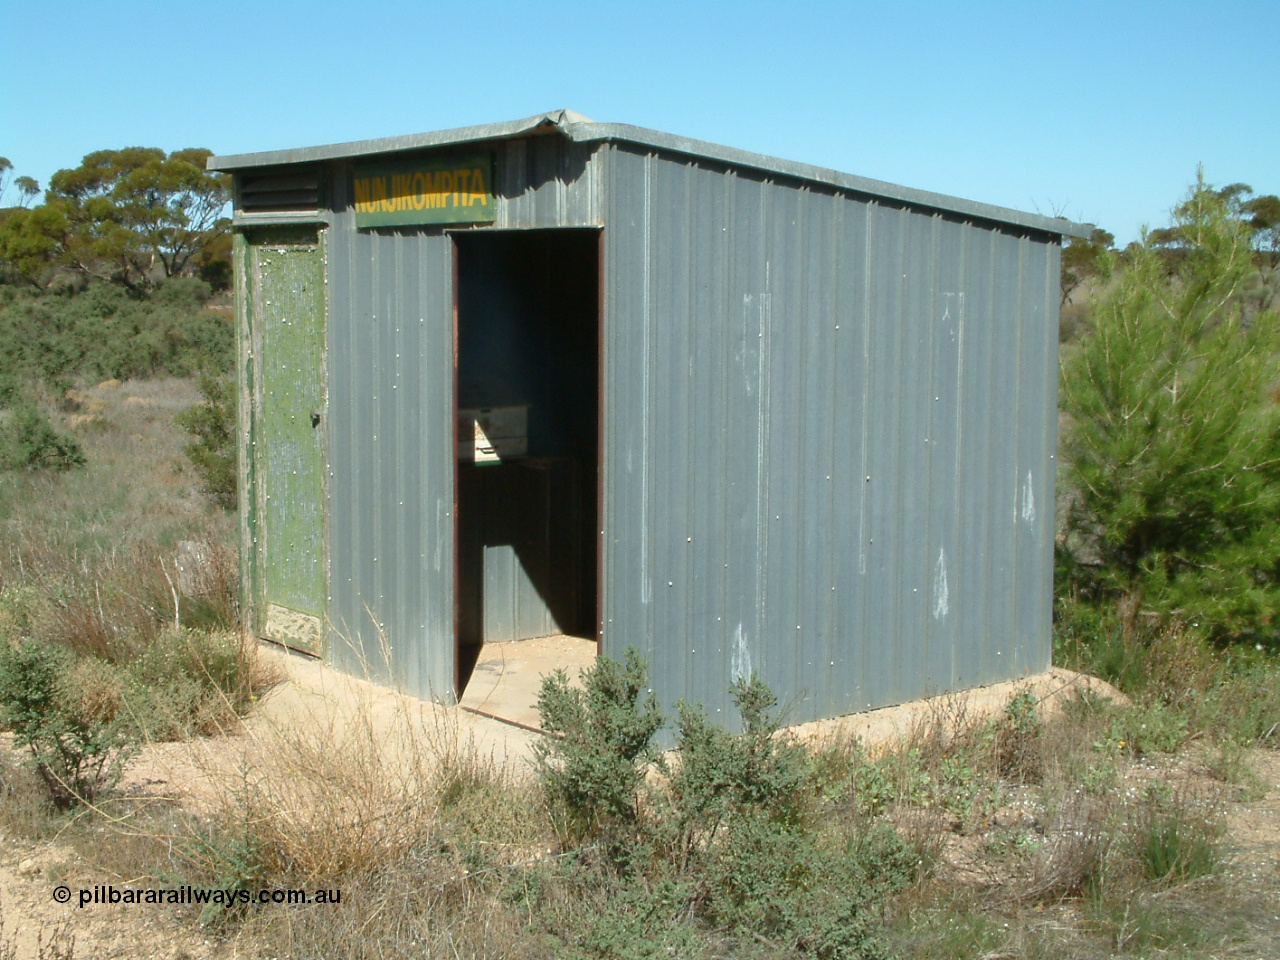 030411 141342
Nunjikompita, aboriginal word for 'burnt hair', located , terminus of line from 14th August 1914 until Thevenard extension opened on the 8th of February 1915, 'station' shelter shed, consignment register desk still in situ.
